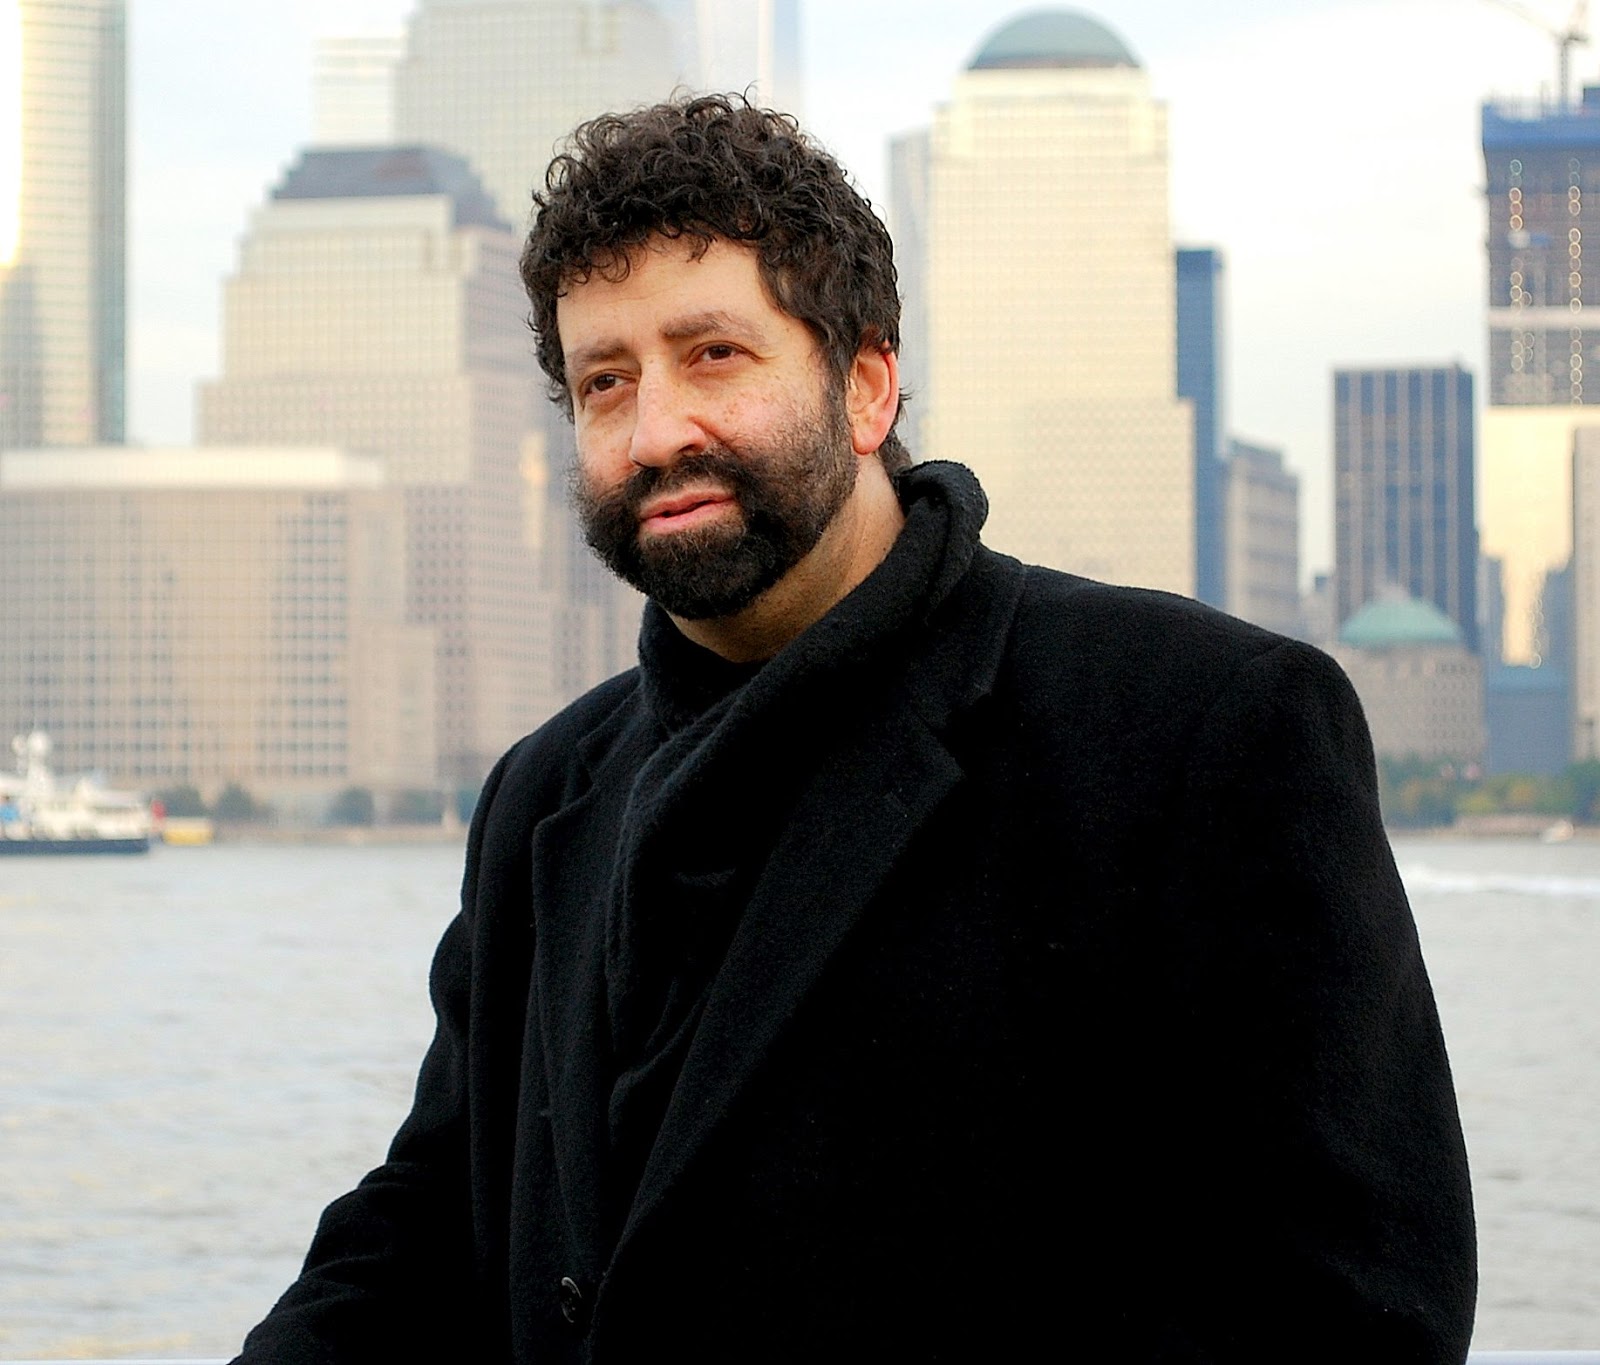 Bible Prophecies Fulfilled Jonathan Cahn Teaches About the Bible's